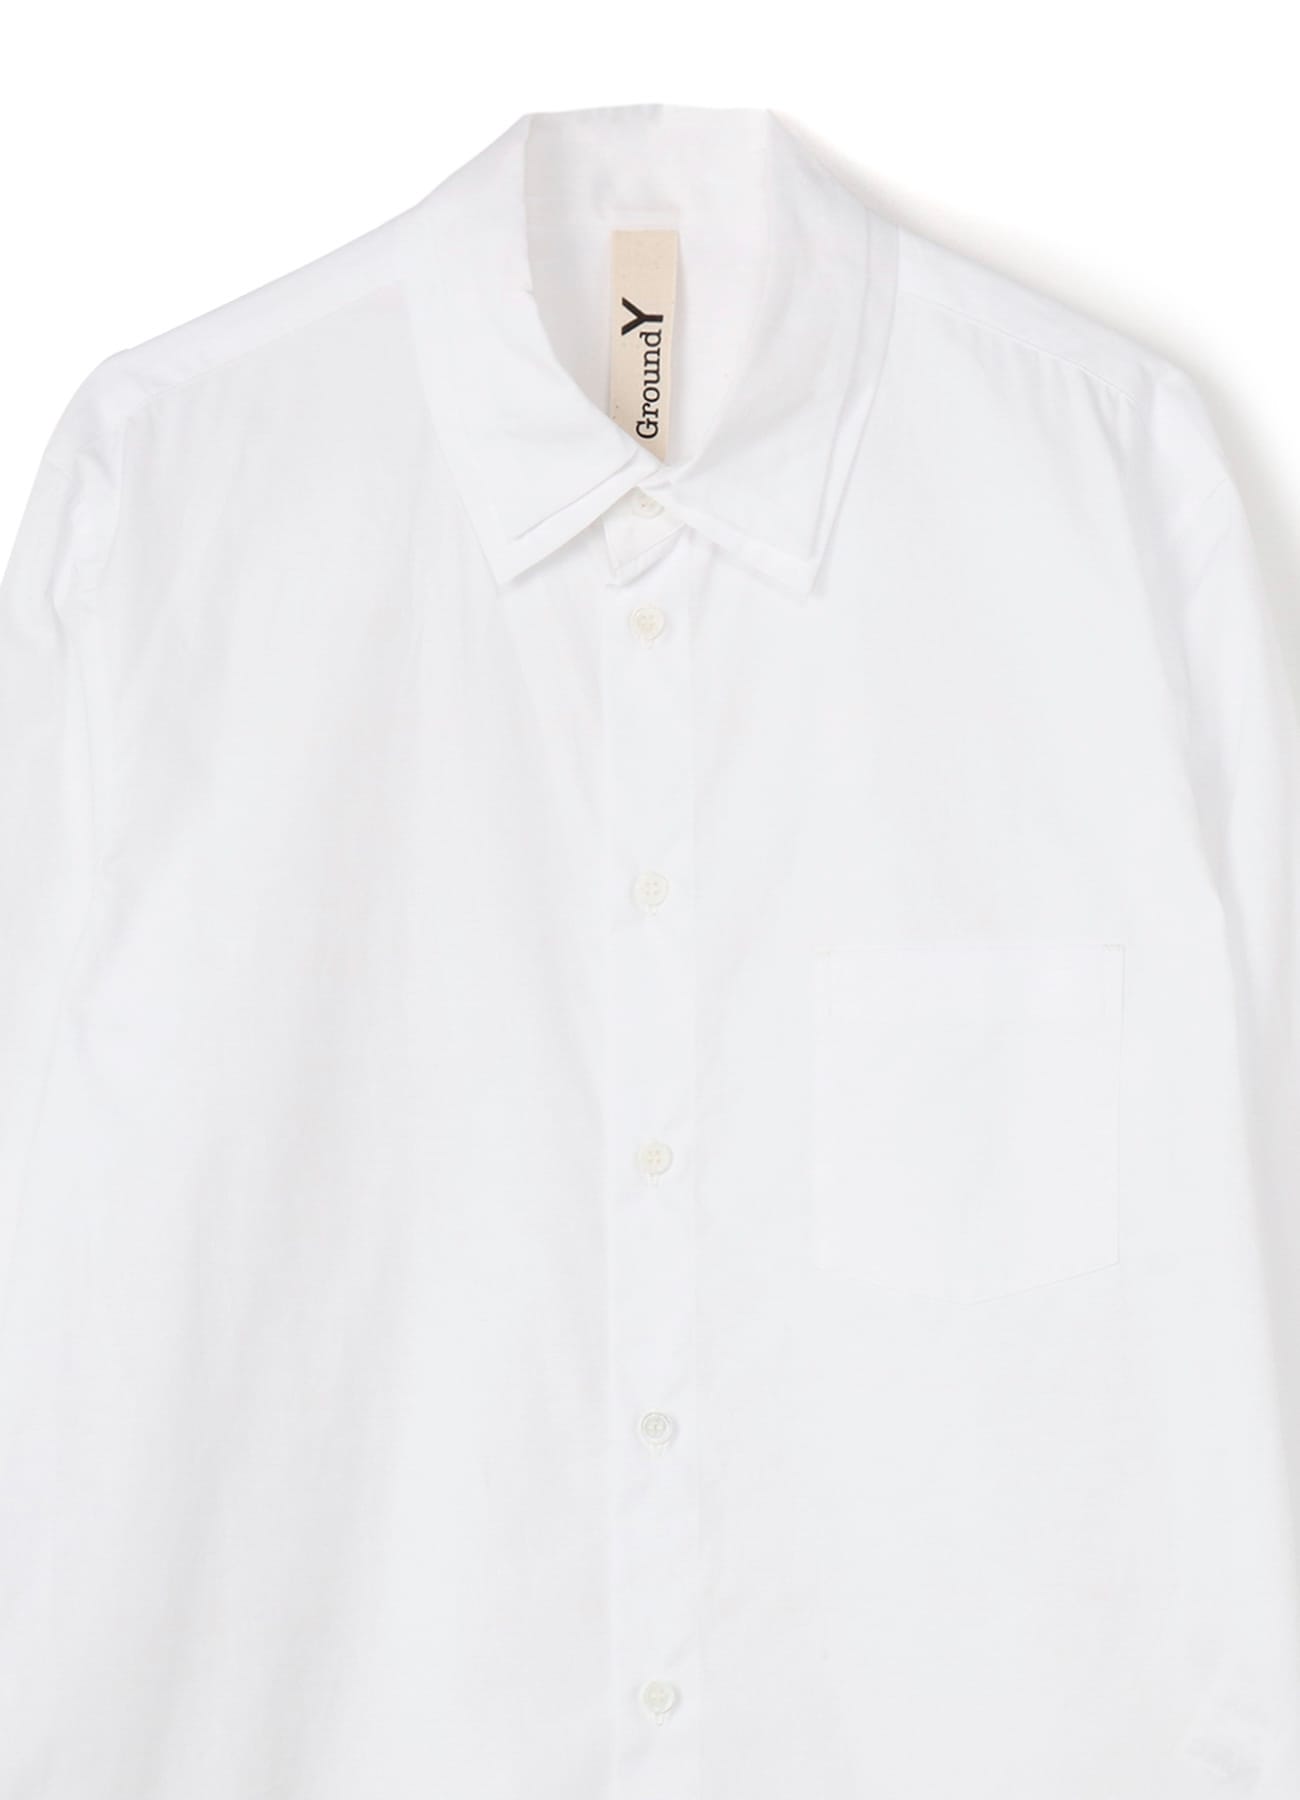 100/2 COTTON BROAD DOUBLE COLLAR SHIRT